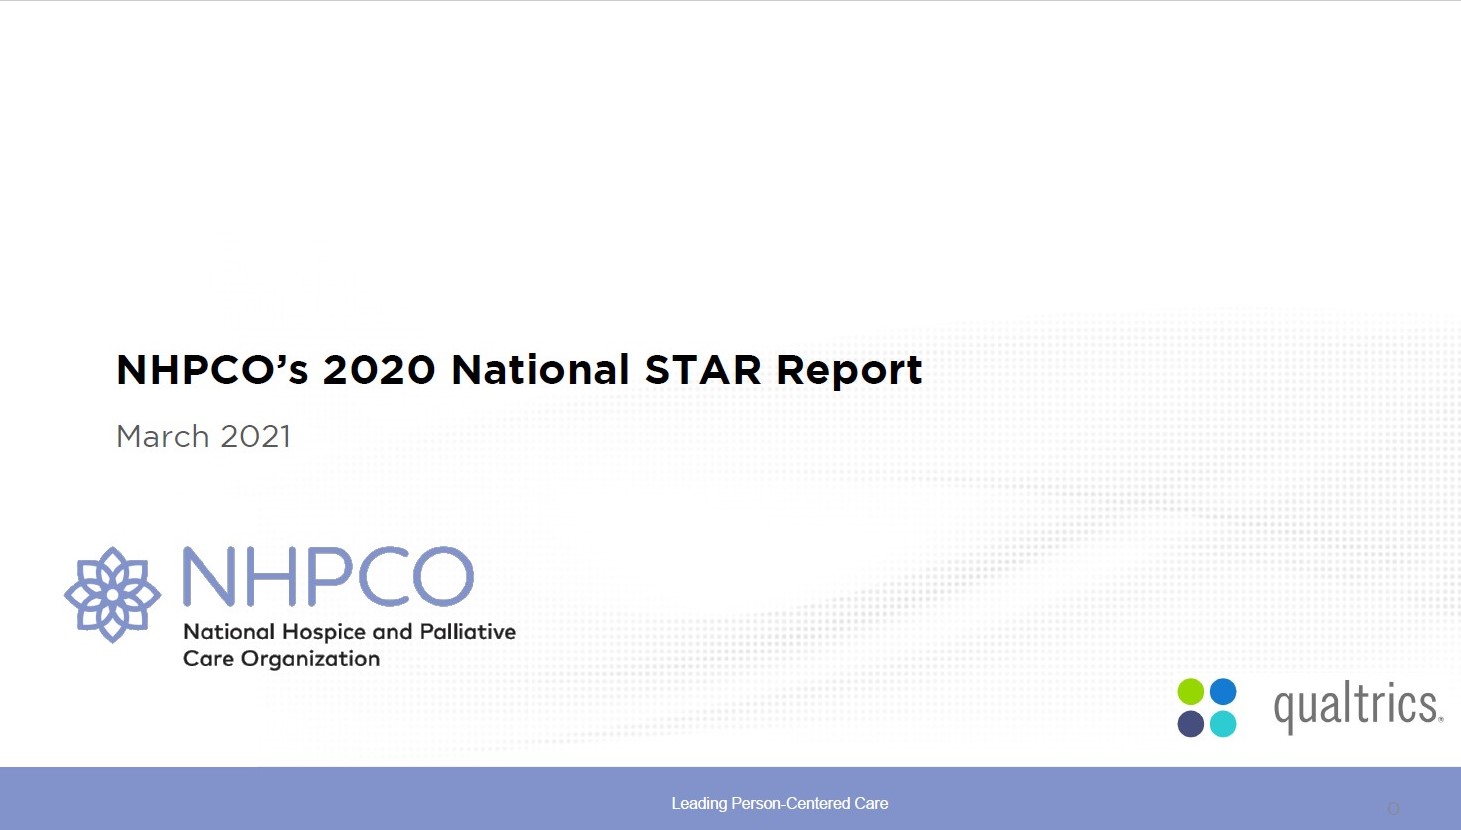 NHPCO's 2020 National Star Report (PDF only)